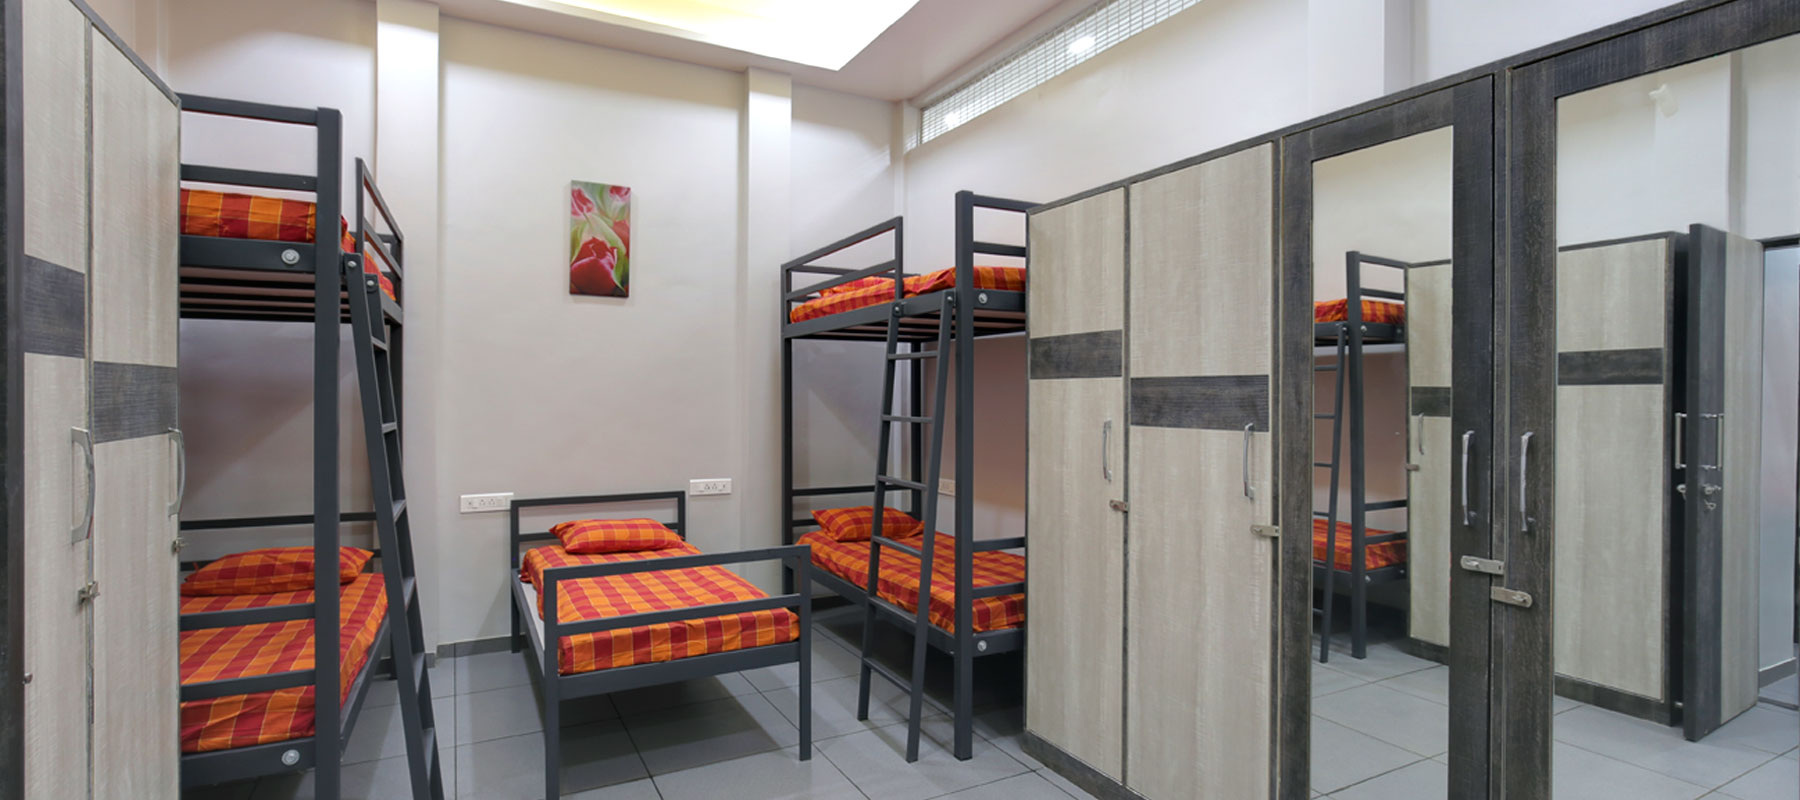 female hostel near swargate pune, girls PG near deccan, girls hostel with seperate study rooms, ladies PG Accomodation